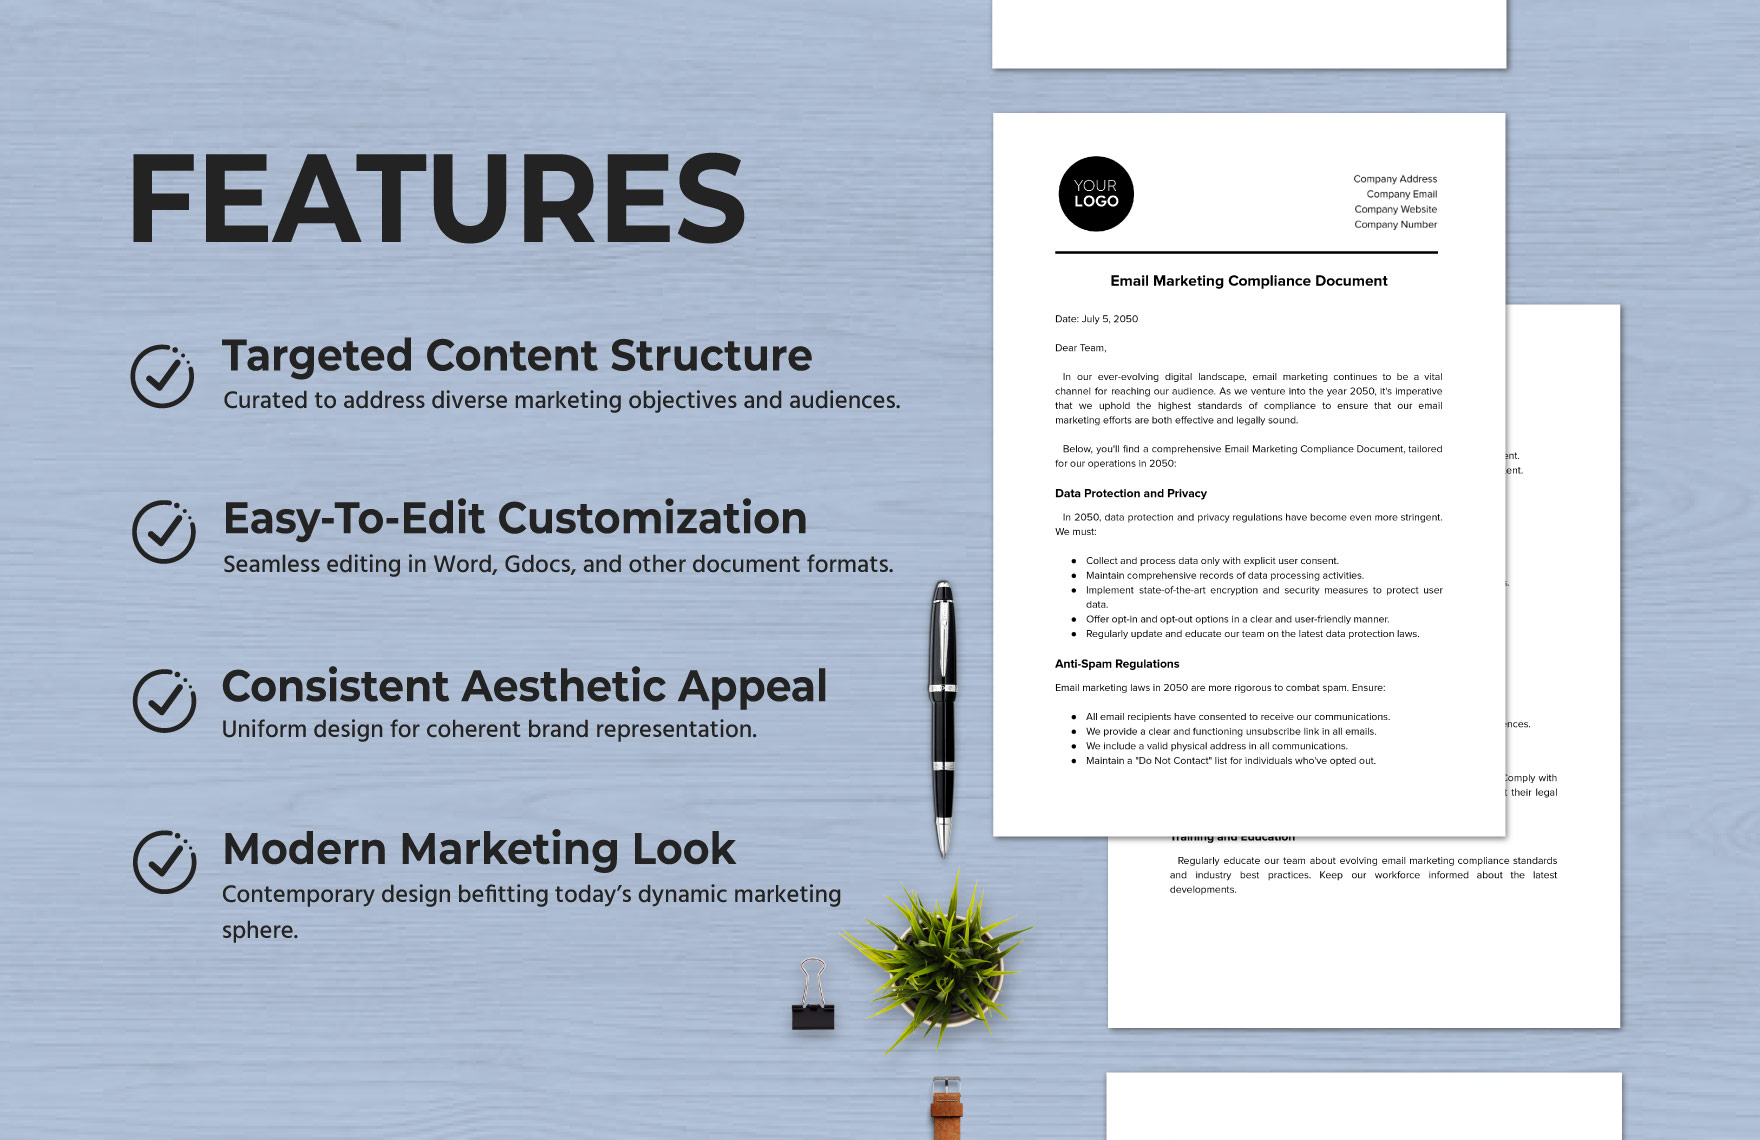 Email Marketing Compliance Document Template